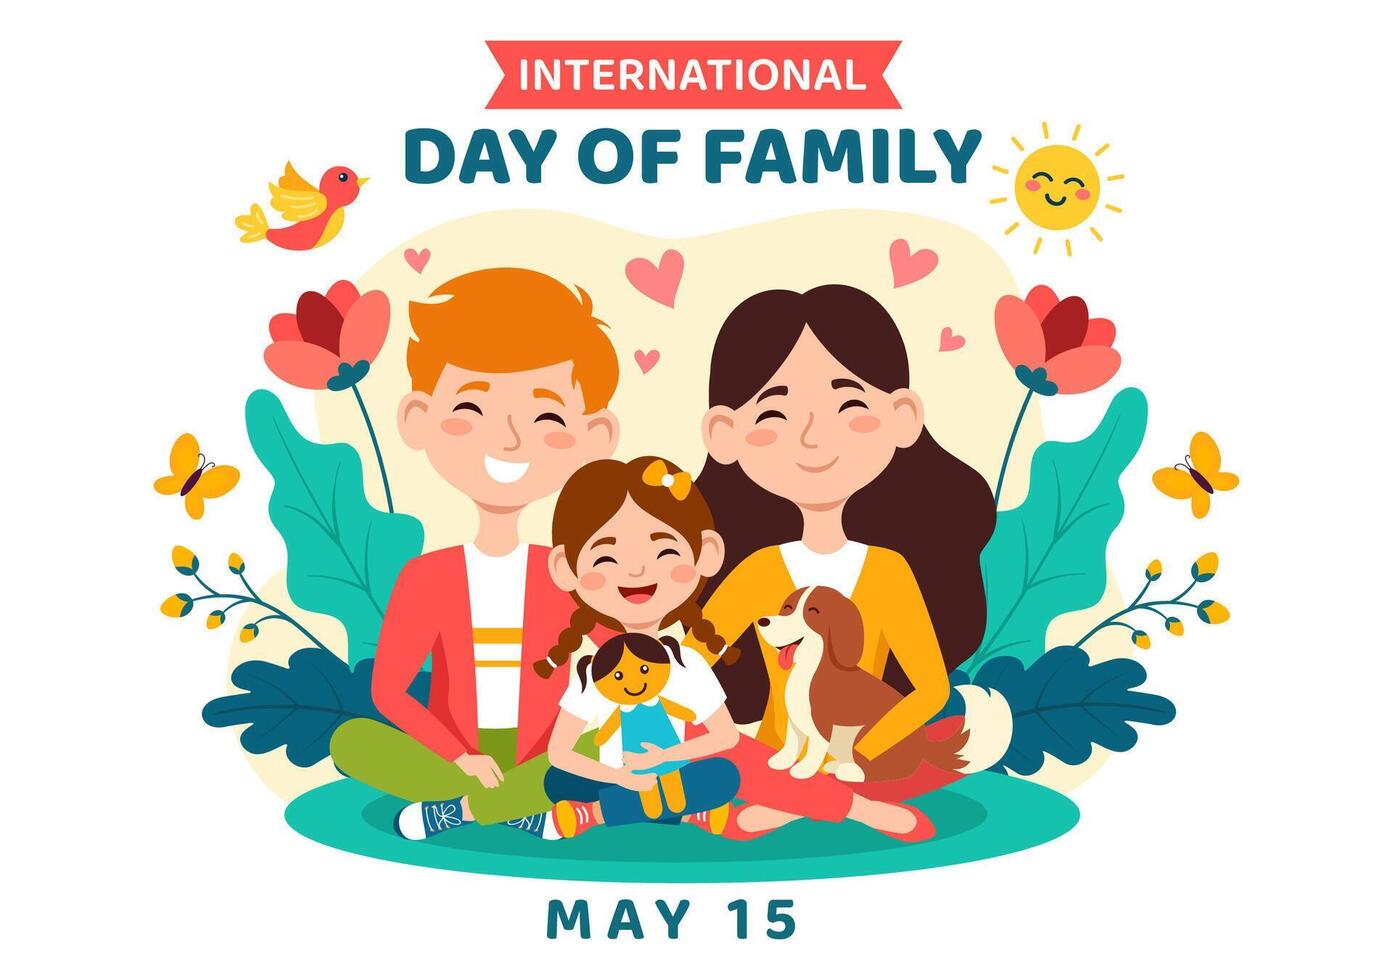 International Day of Family Vector Illustration with Mom, Dad and Children Character to Happiness and Love Celebration in Flat Kids Cartoon Background